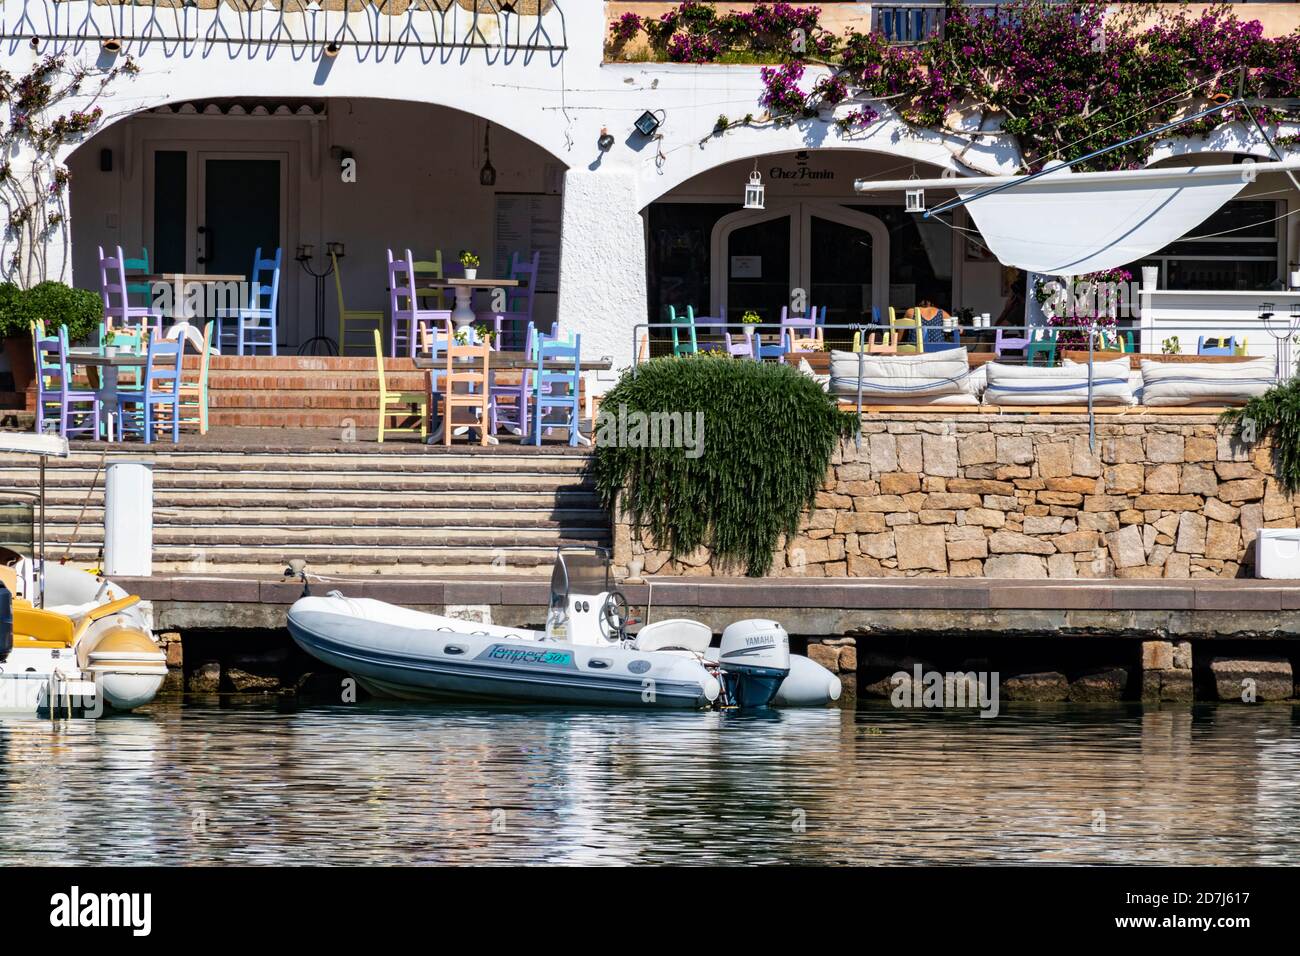 Marina dell' Orso di Poltu Quatu Waterfront. Quayside View of Hotel and Restaurant with Colourful Chairs and Moored Dinghy. Sardinia, Italy. Stock Photo